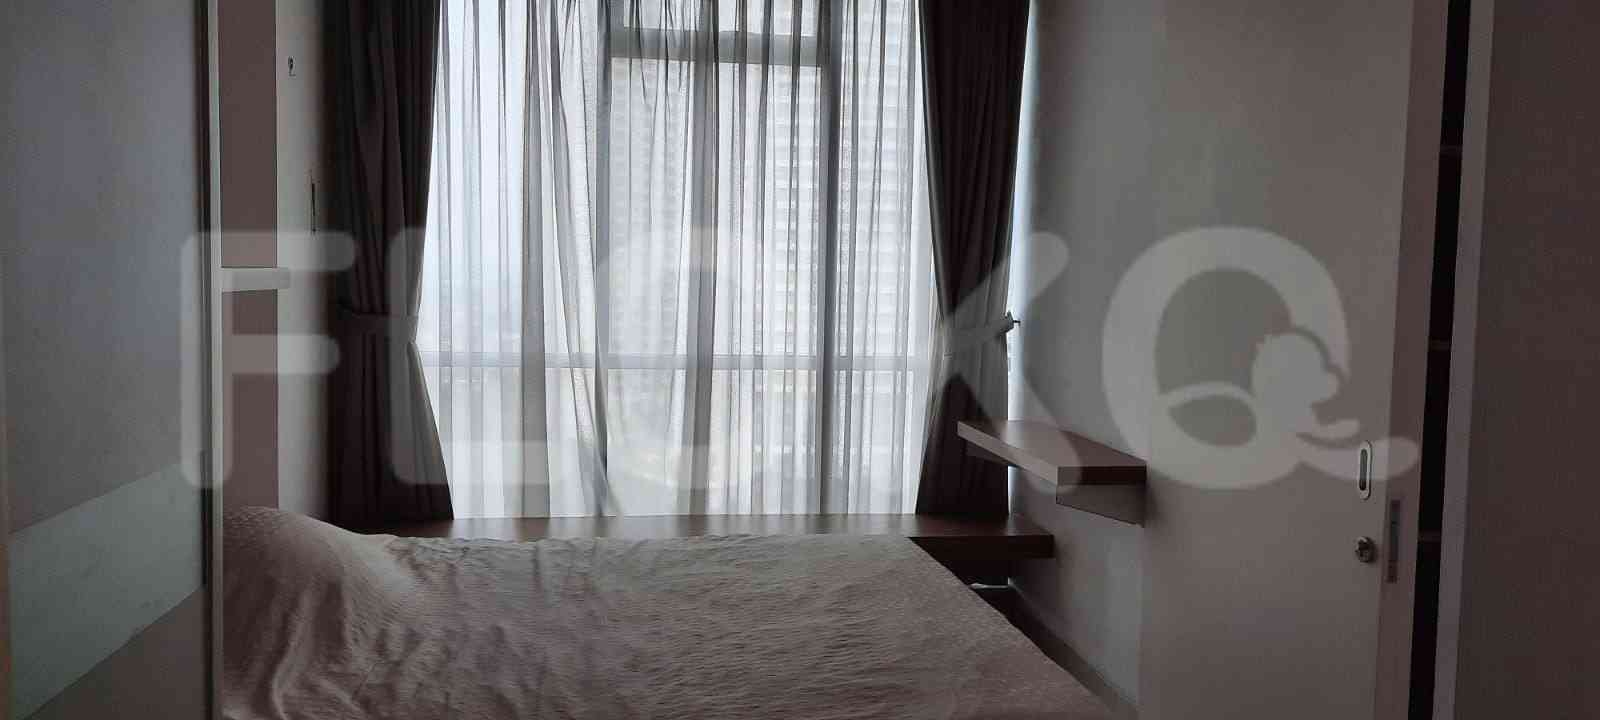 1 Bedroom on 15th Floor for Rent in Kuningan Place Apartment - fkud9c 5